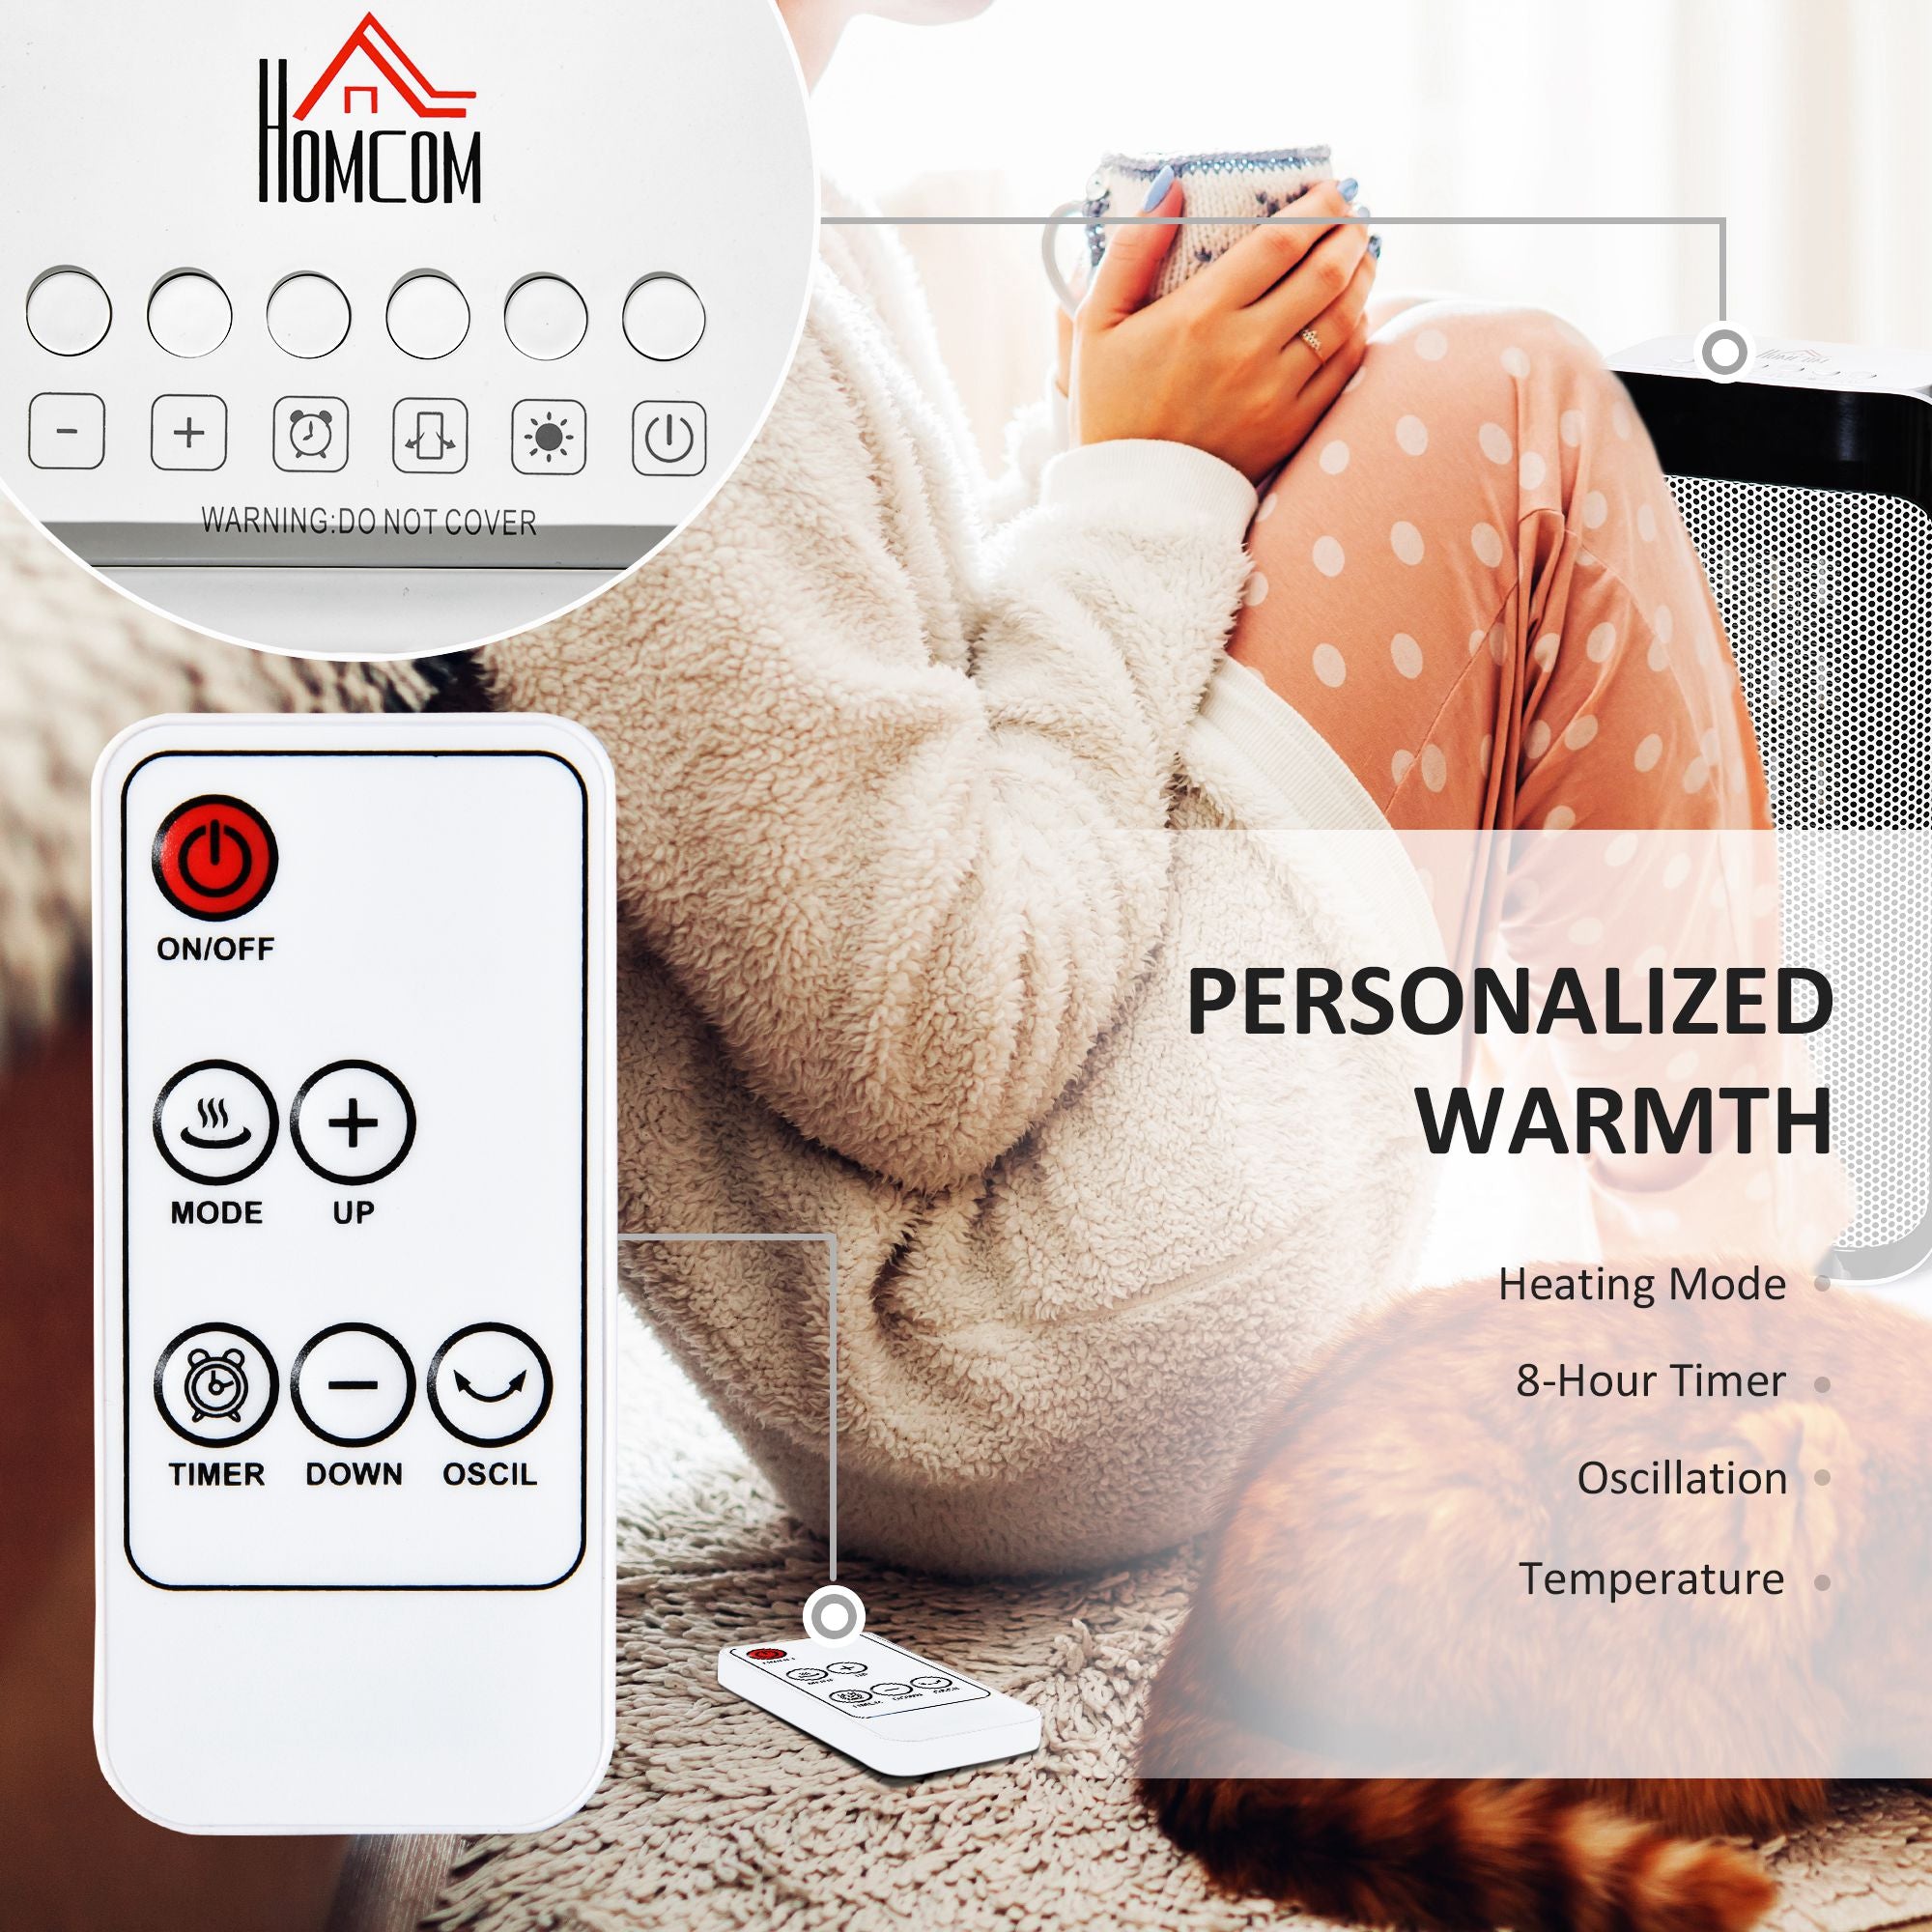 HOMCOM Ceramic Space Heater Oscillating Portable Tower Heater w/ Three Heating Mode, Programmable Timer, Over Heating & Tip-over Switch Protection - Inspirely